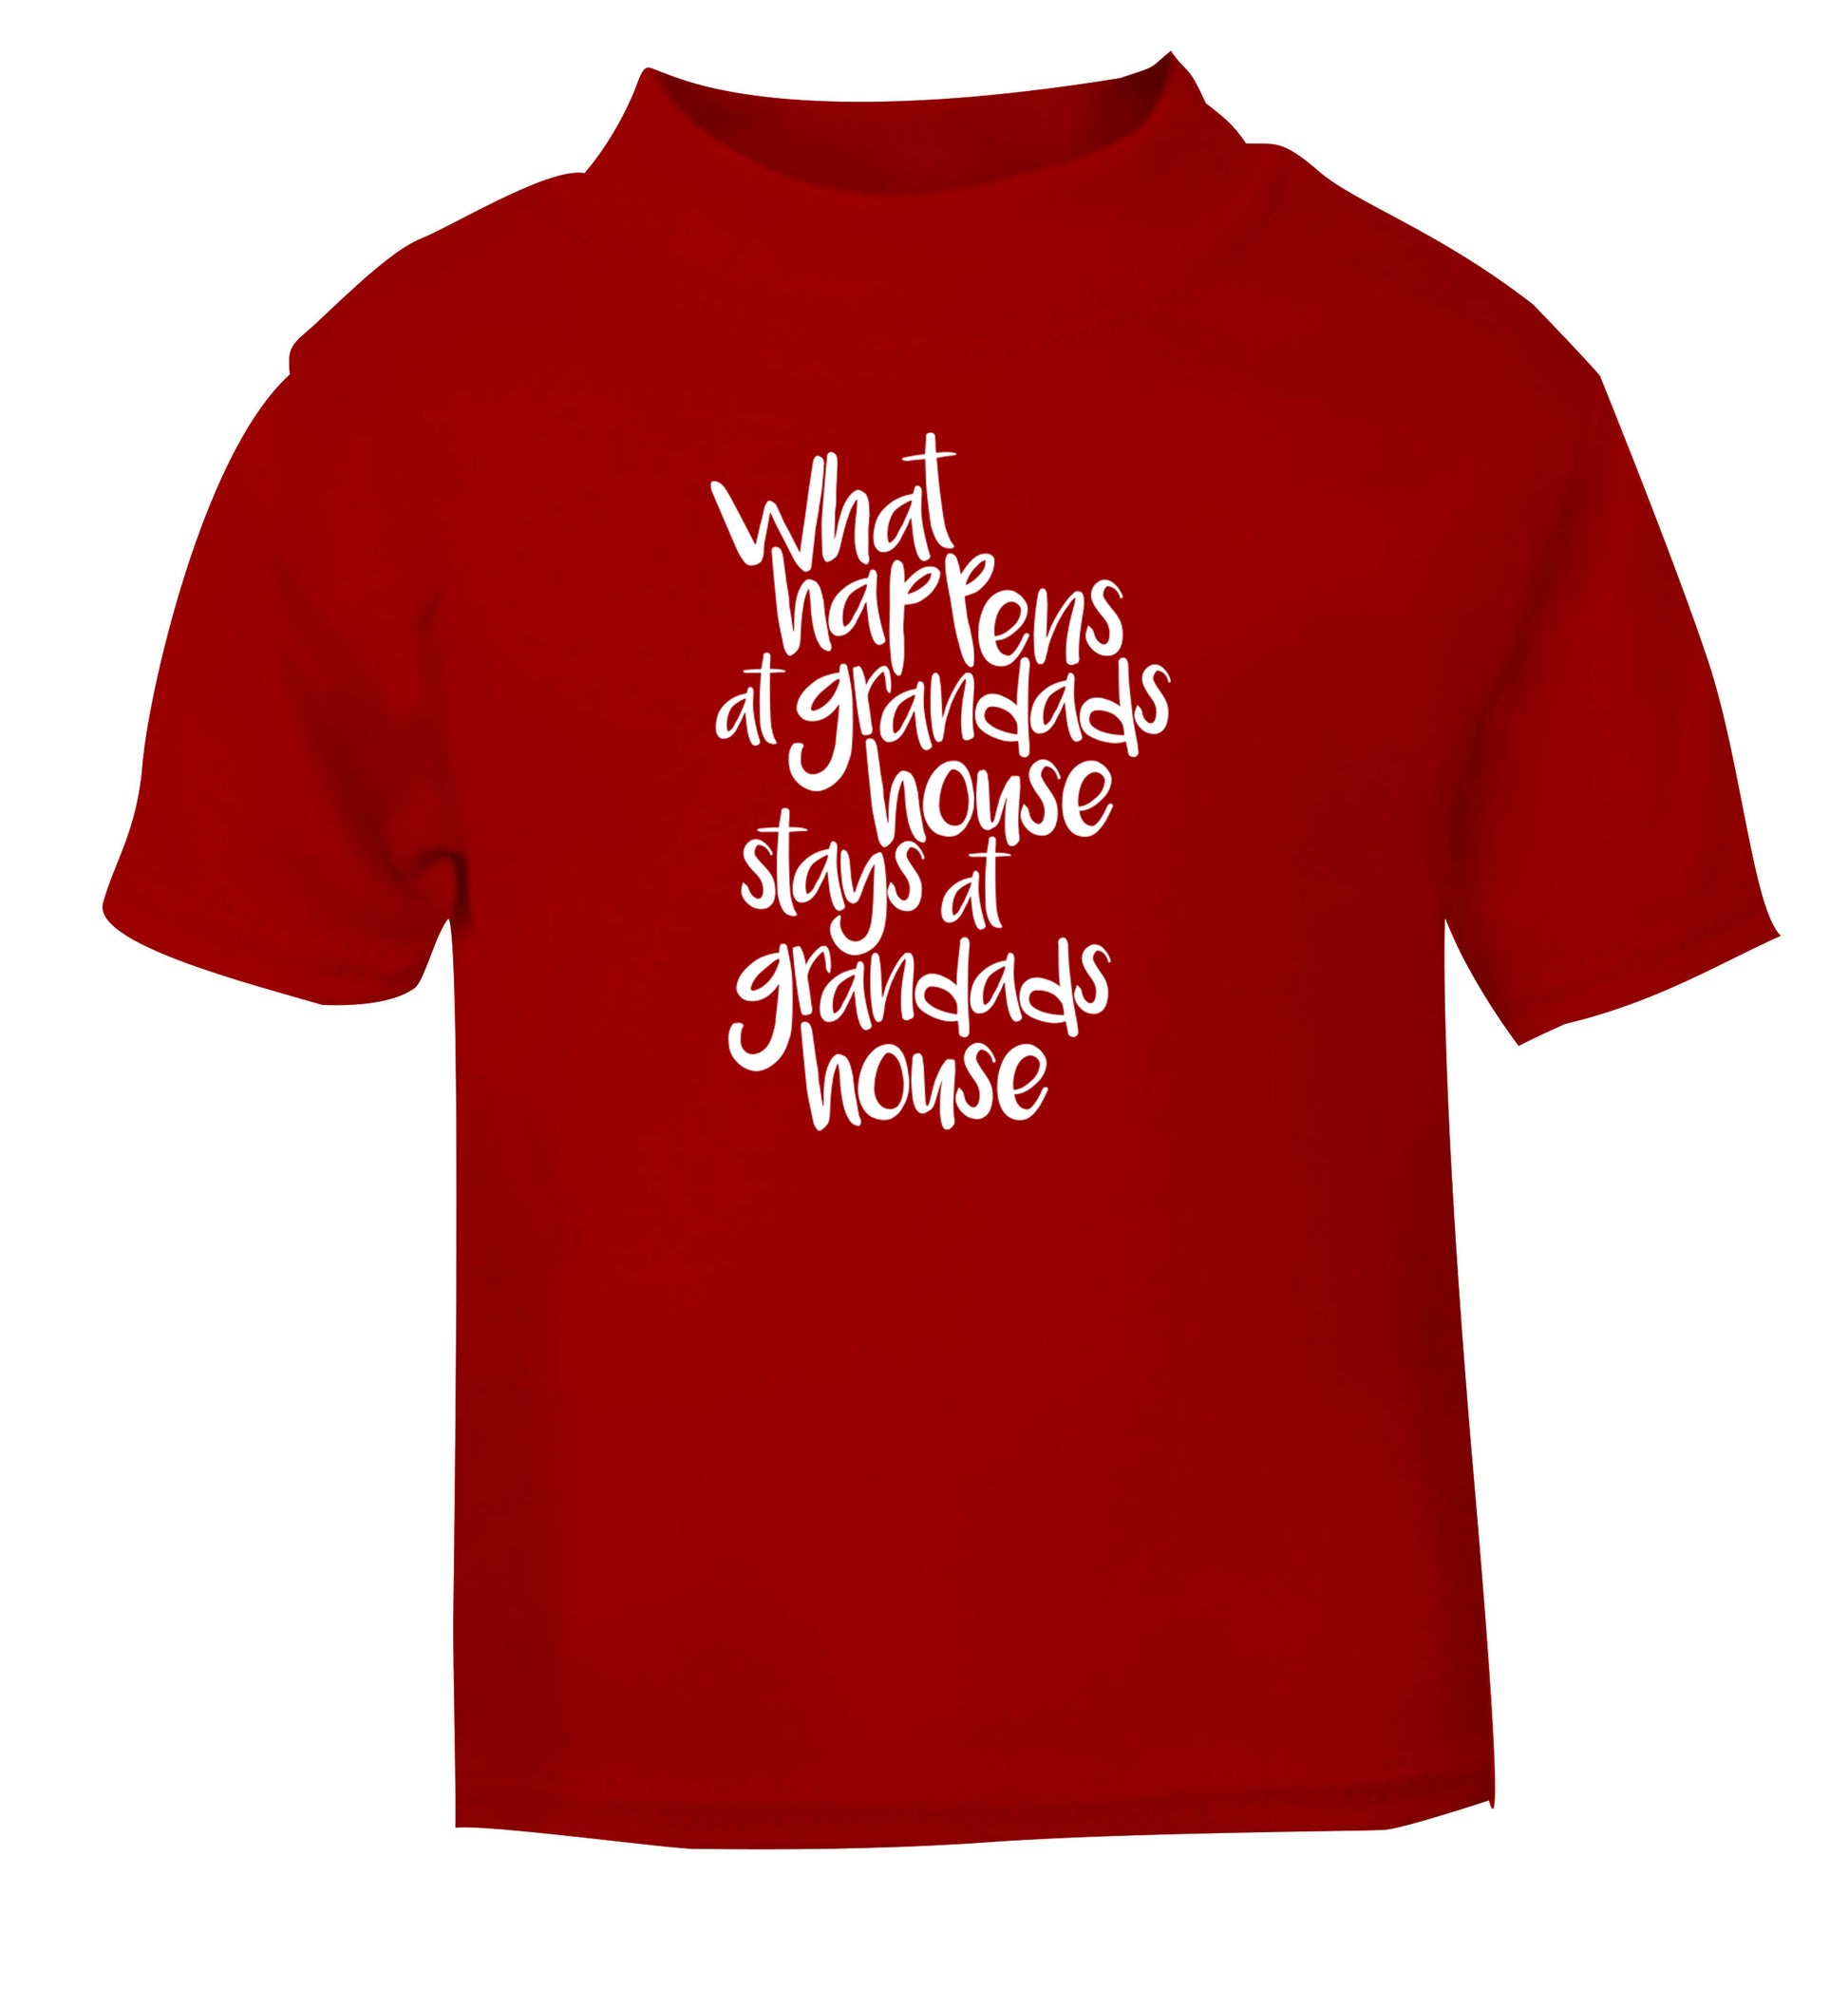 What happens at grandads house stays at grandads house red Baby Toddler Tshirt 2 Years